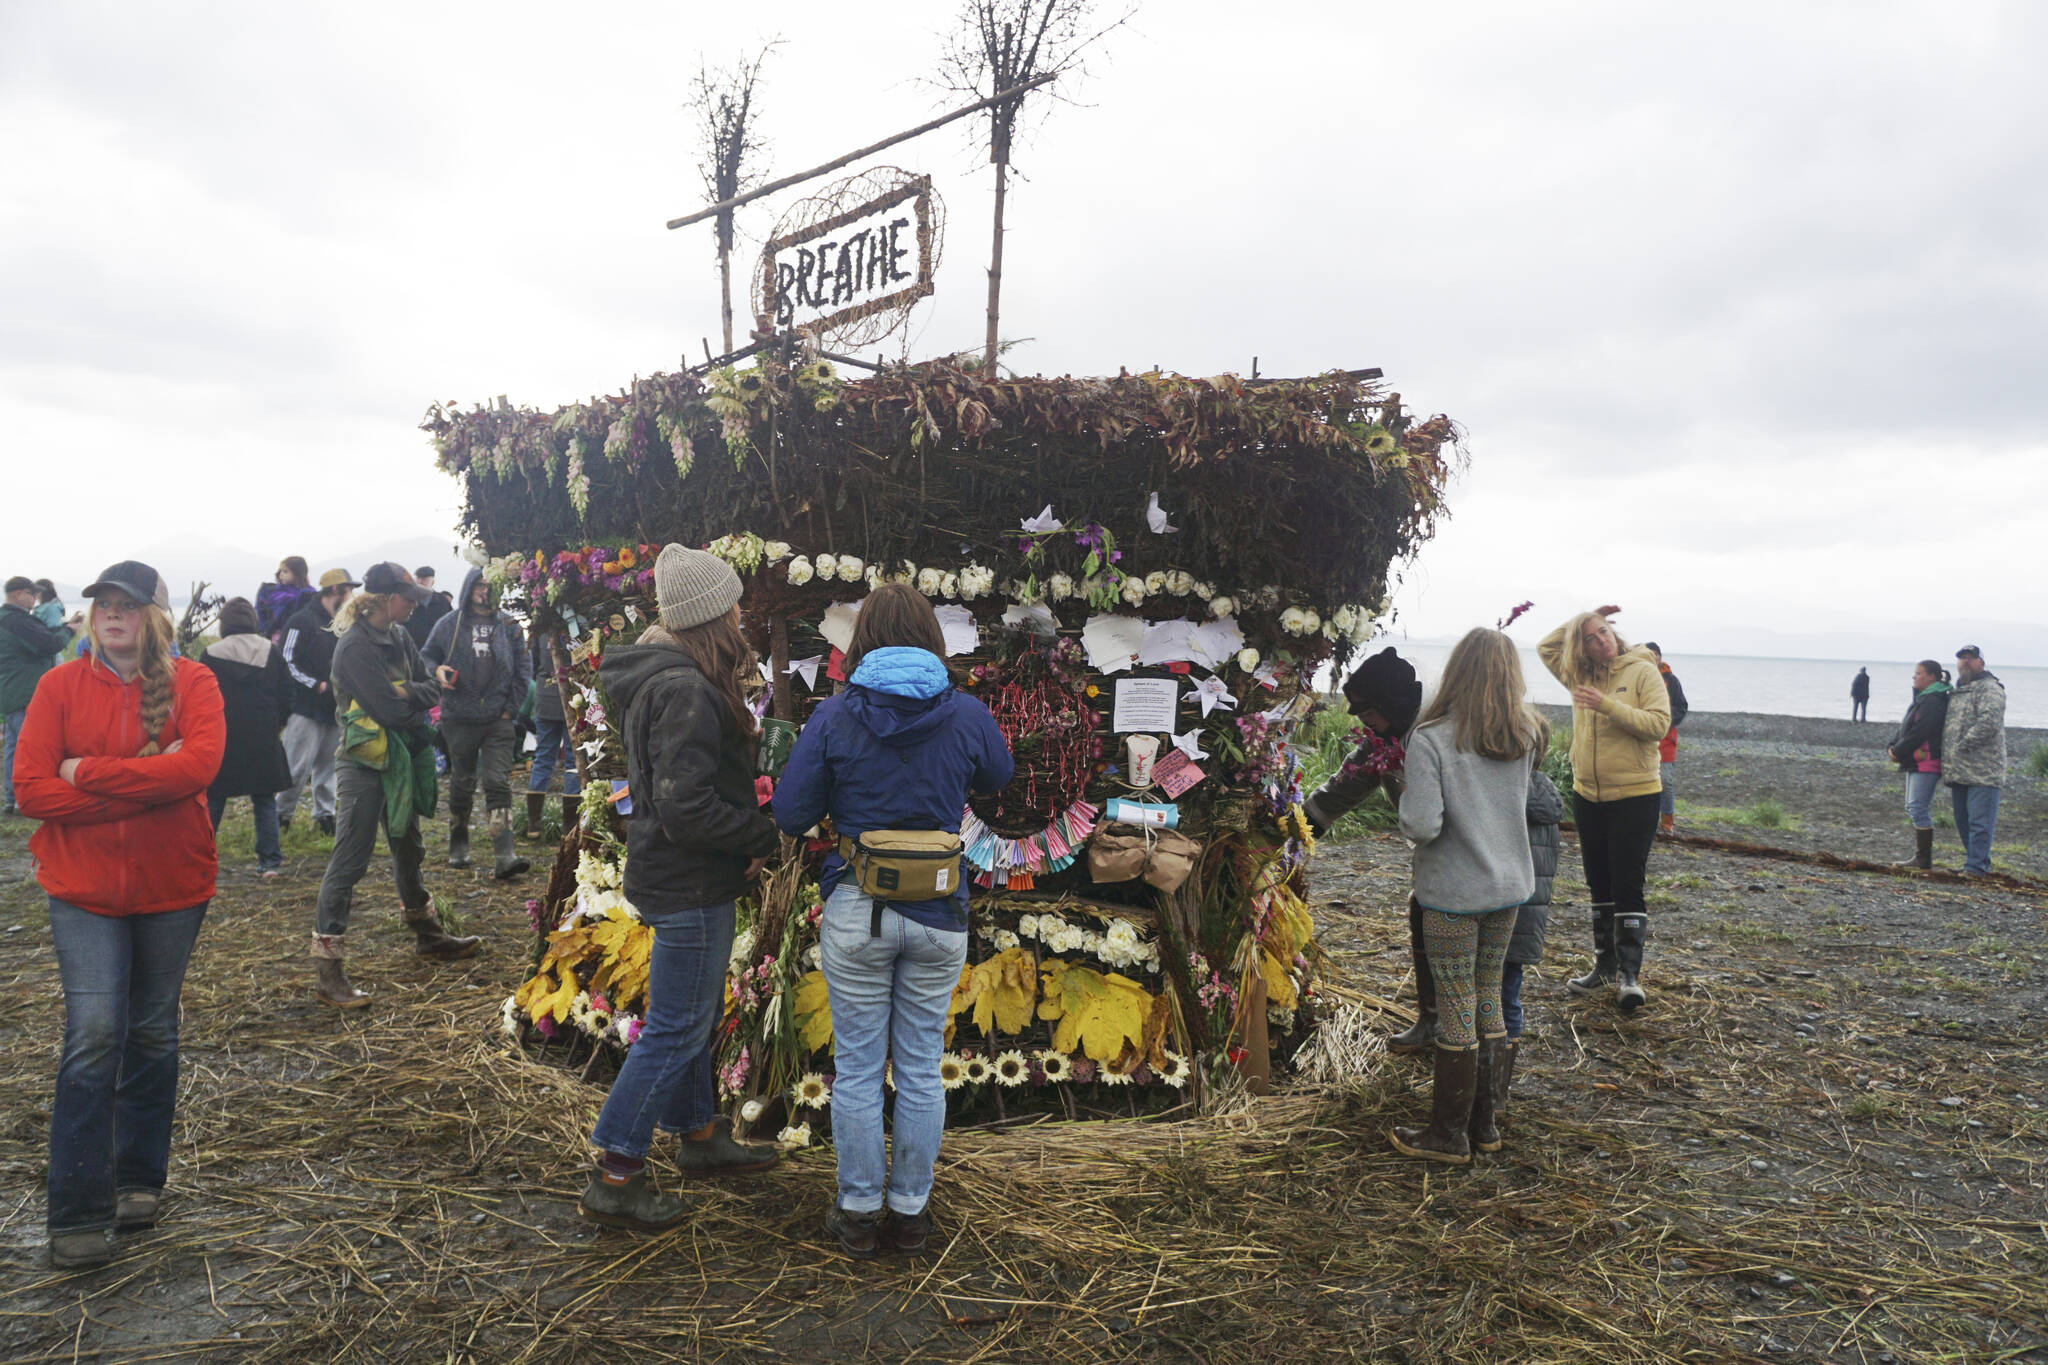 People interact with the 19th annual Burning Basket, “Breathe,” on Sunday, Sept. 11, 2022, at Mariner Park on the Homer Spit in Homer, Alaska. (Photo by Michael Armstrong/Homer News)